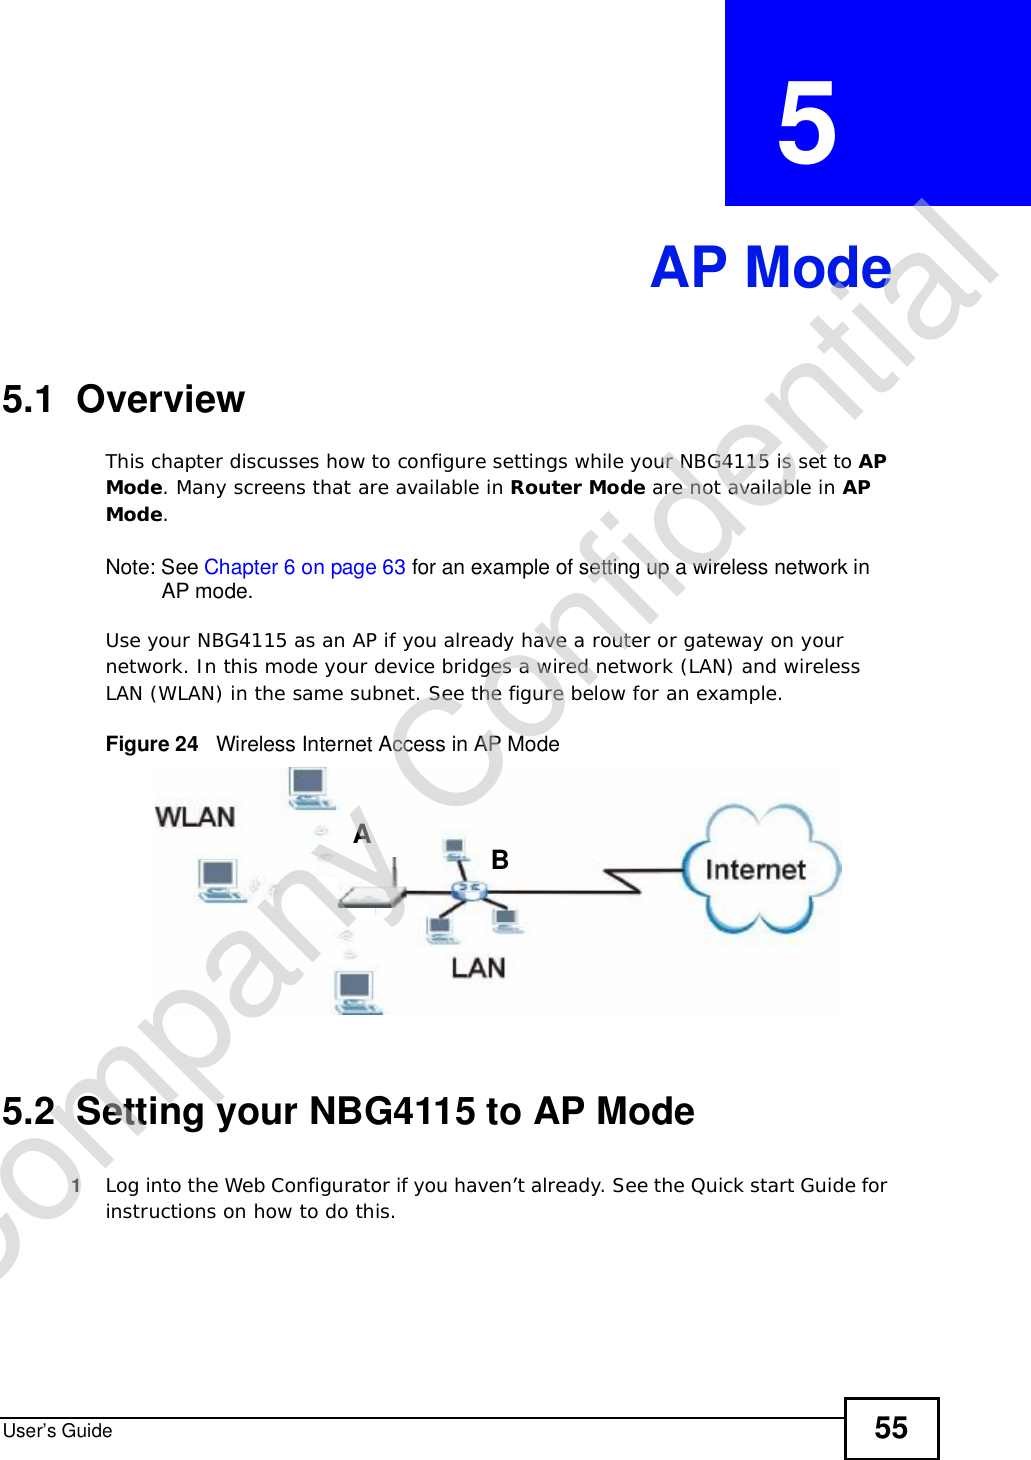 User’s Guide 55CHAPTER  5 AP Mode5.1  OverviewThis chapter discusses how to configure settings while your NBG4115 is set to APMode. Many screens that are available in Router Mode are not available in APMode.Note: See Chapter 6 on page 63 for an example of setting up a wireless network in AP mode. Use your NBG4115 as an AP if you already have a router or gateway on your network. In this mode your device bridges a wired network (LAN) and wireless LAN (WLAN) in the same subnet. See the figure below for an example.Figure 24   Wireless Internet Access in AP Mode 5.2  Setting your NBG4115 to AP Mode1Log into the Web Configurator if you haven’t already. See the Quick start Guide for instructions on how to do this.ABCompany Confidential